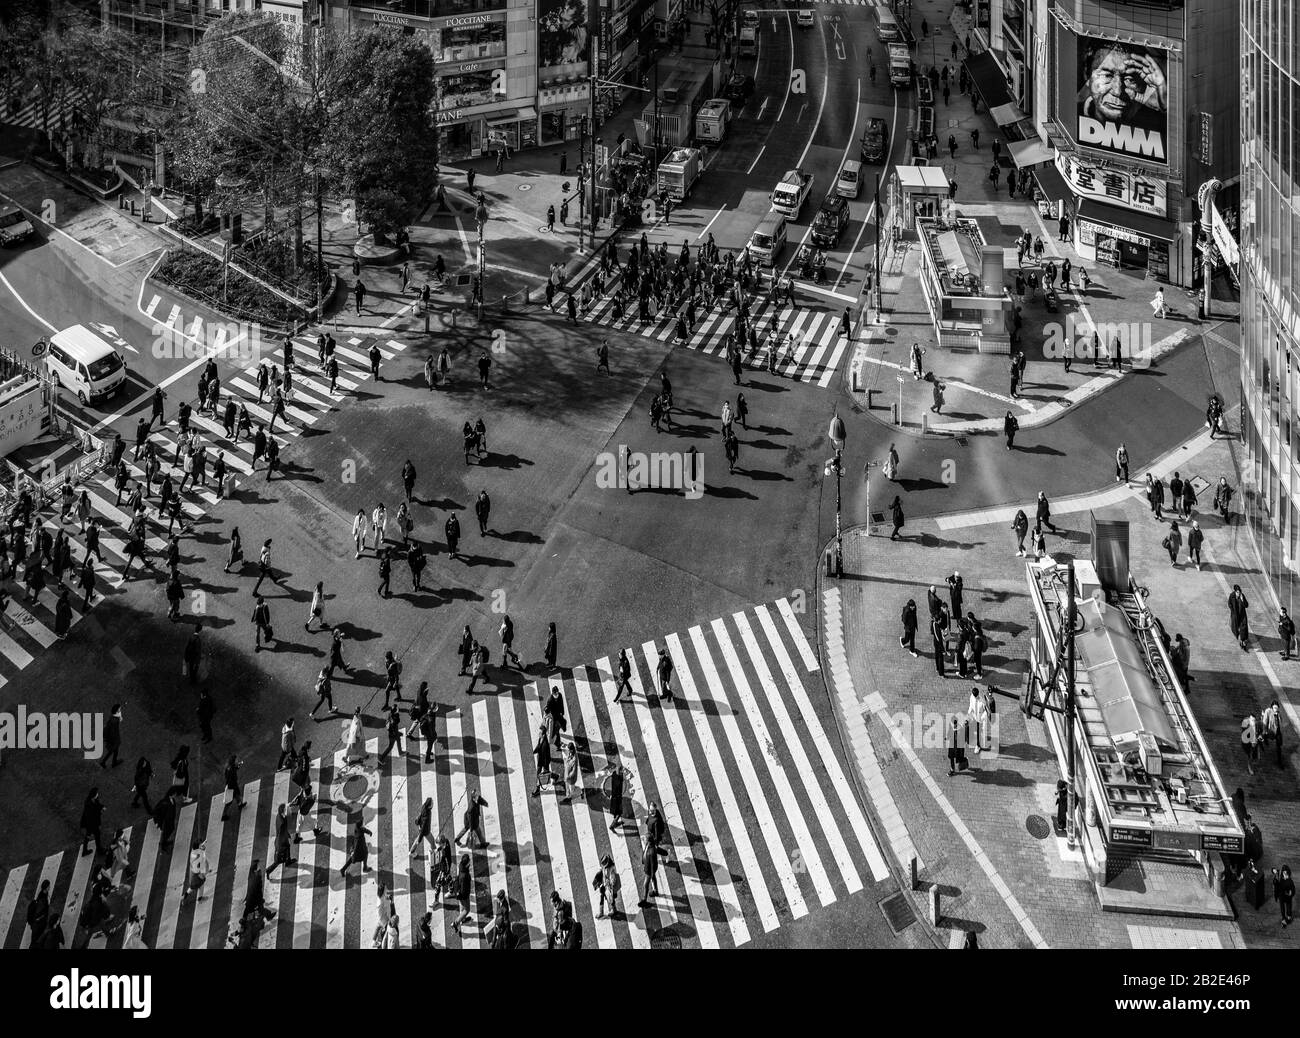 A black and white picture of the Shibuya Crossing, as seen from above, in Tokyo. Stock Photo